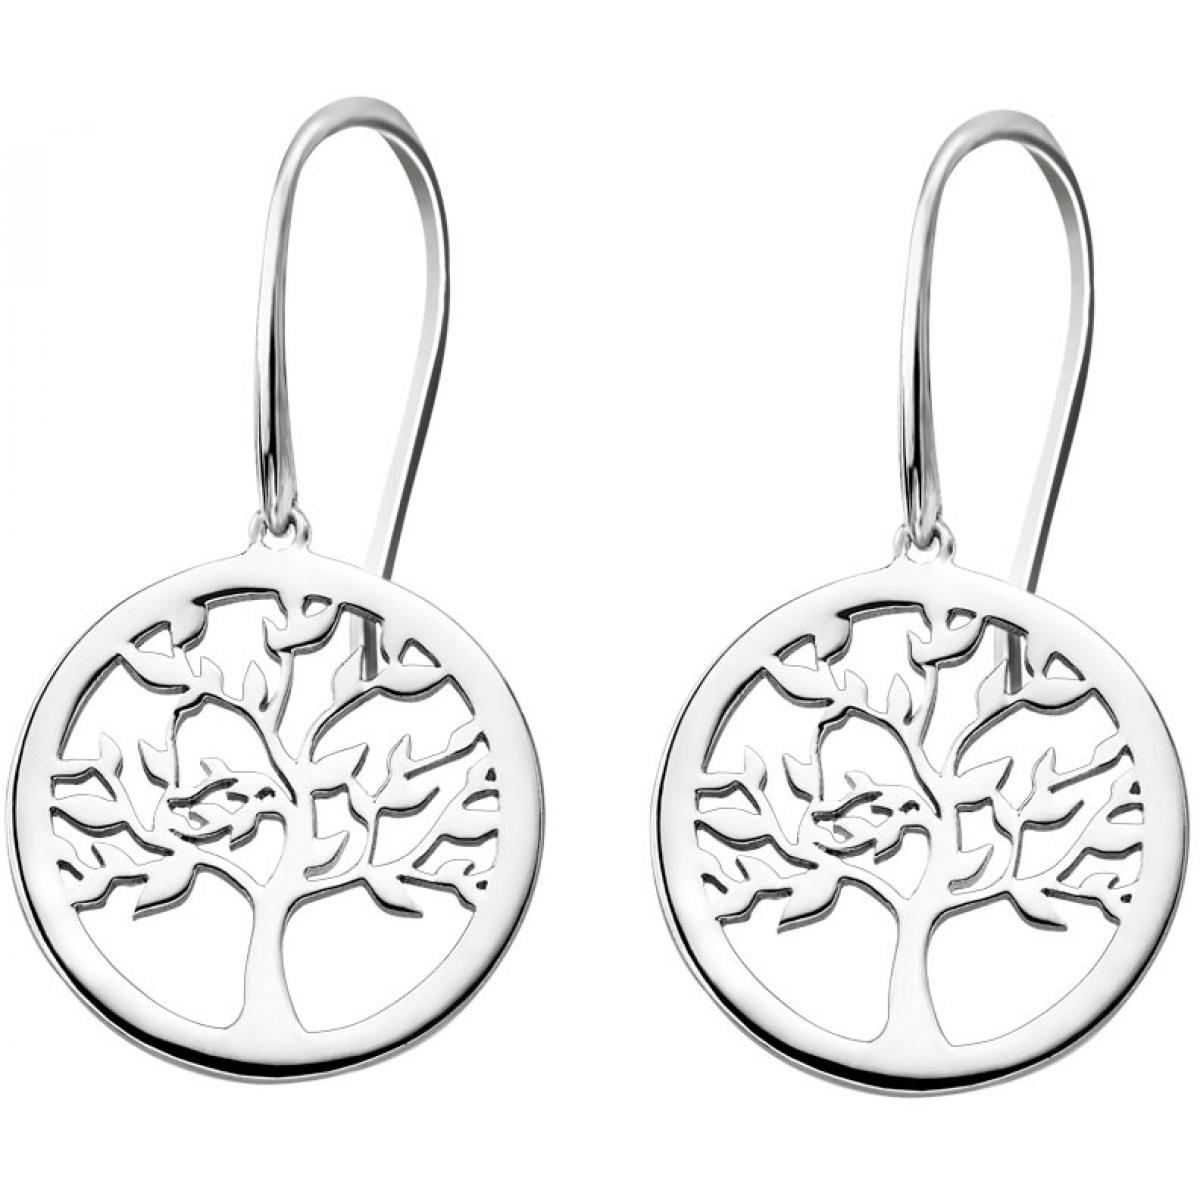 Boucles d'oreilles Lotus Silver TREE OF LIFE LP1641-4-1 - Boucles d'oreilles TREE OF LIFE Argent